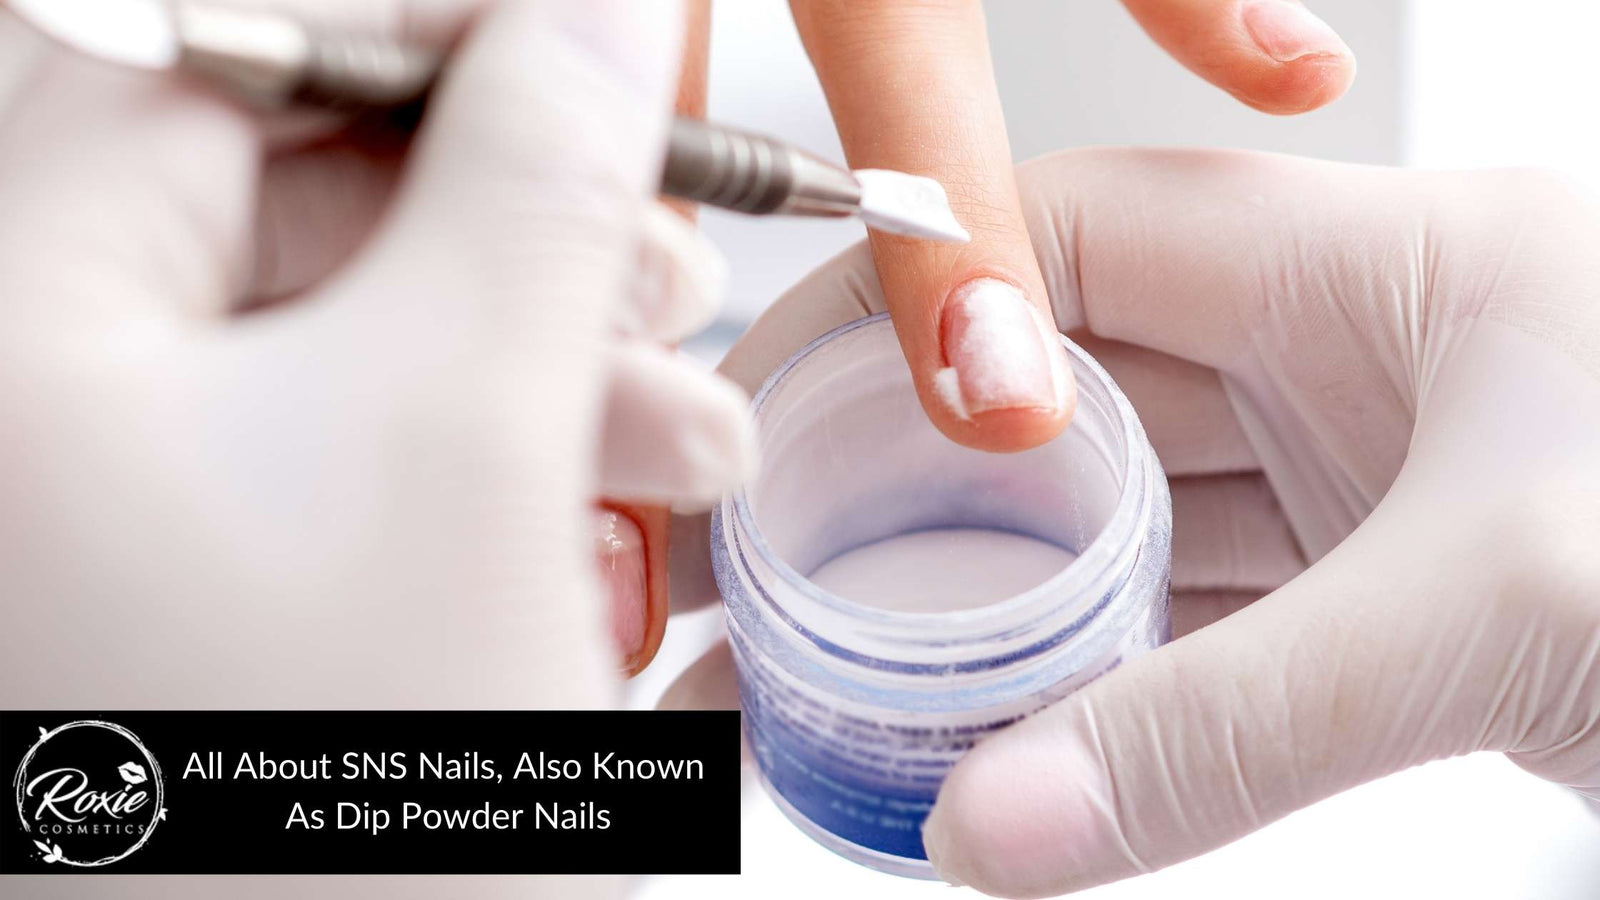 All About SNS Nails, Also Known As Dip Powder Nails